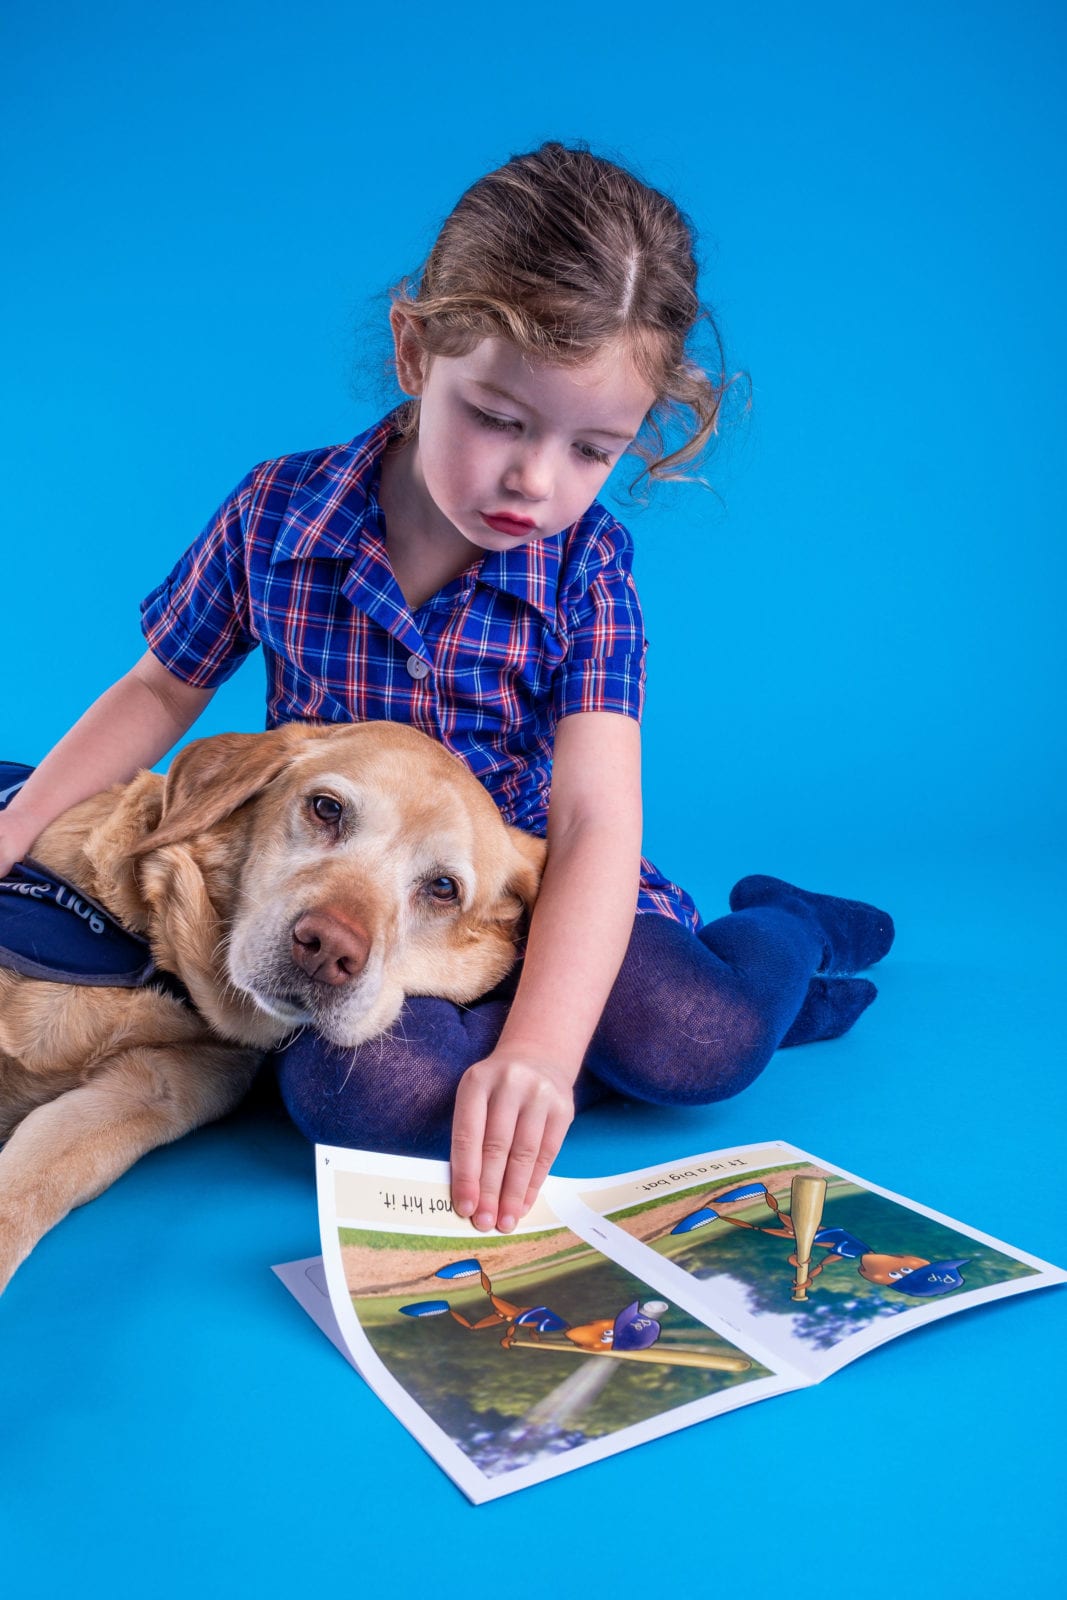 Nursery pupil with a CAL dog - www.canineassistedlearning.com